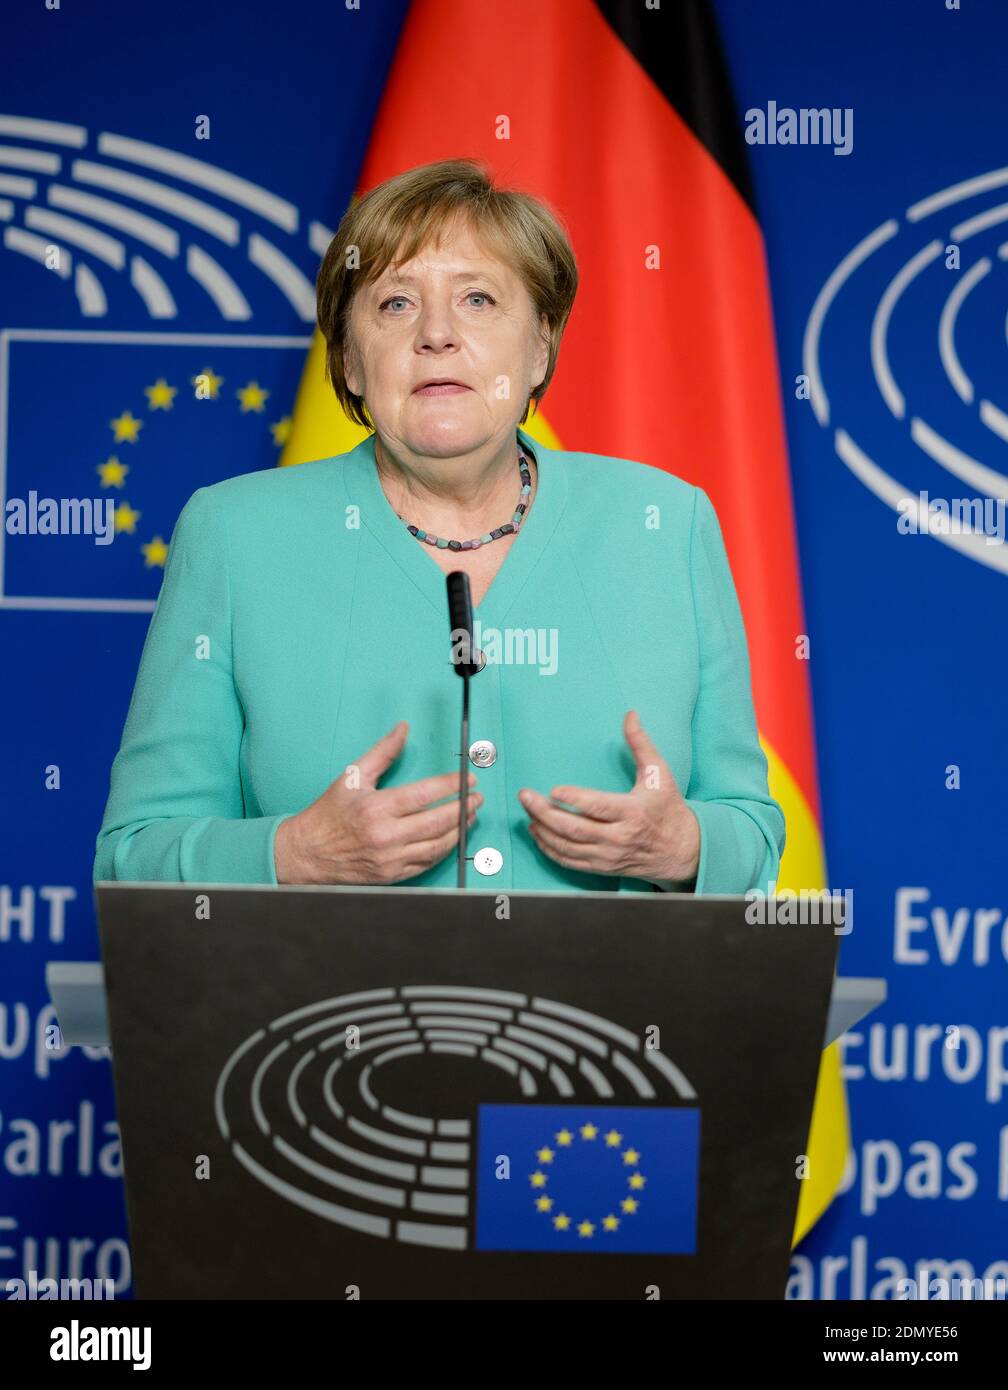 Belgium, Brussels, on July 8, 2020: official visit of German Chancellor Angela Merkel to the European Parliament Stock Photo